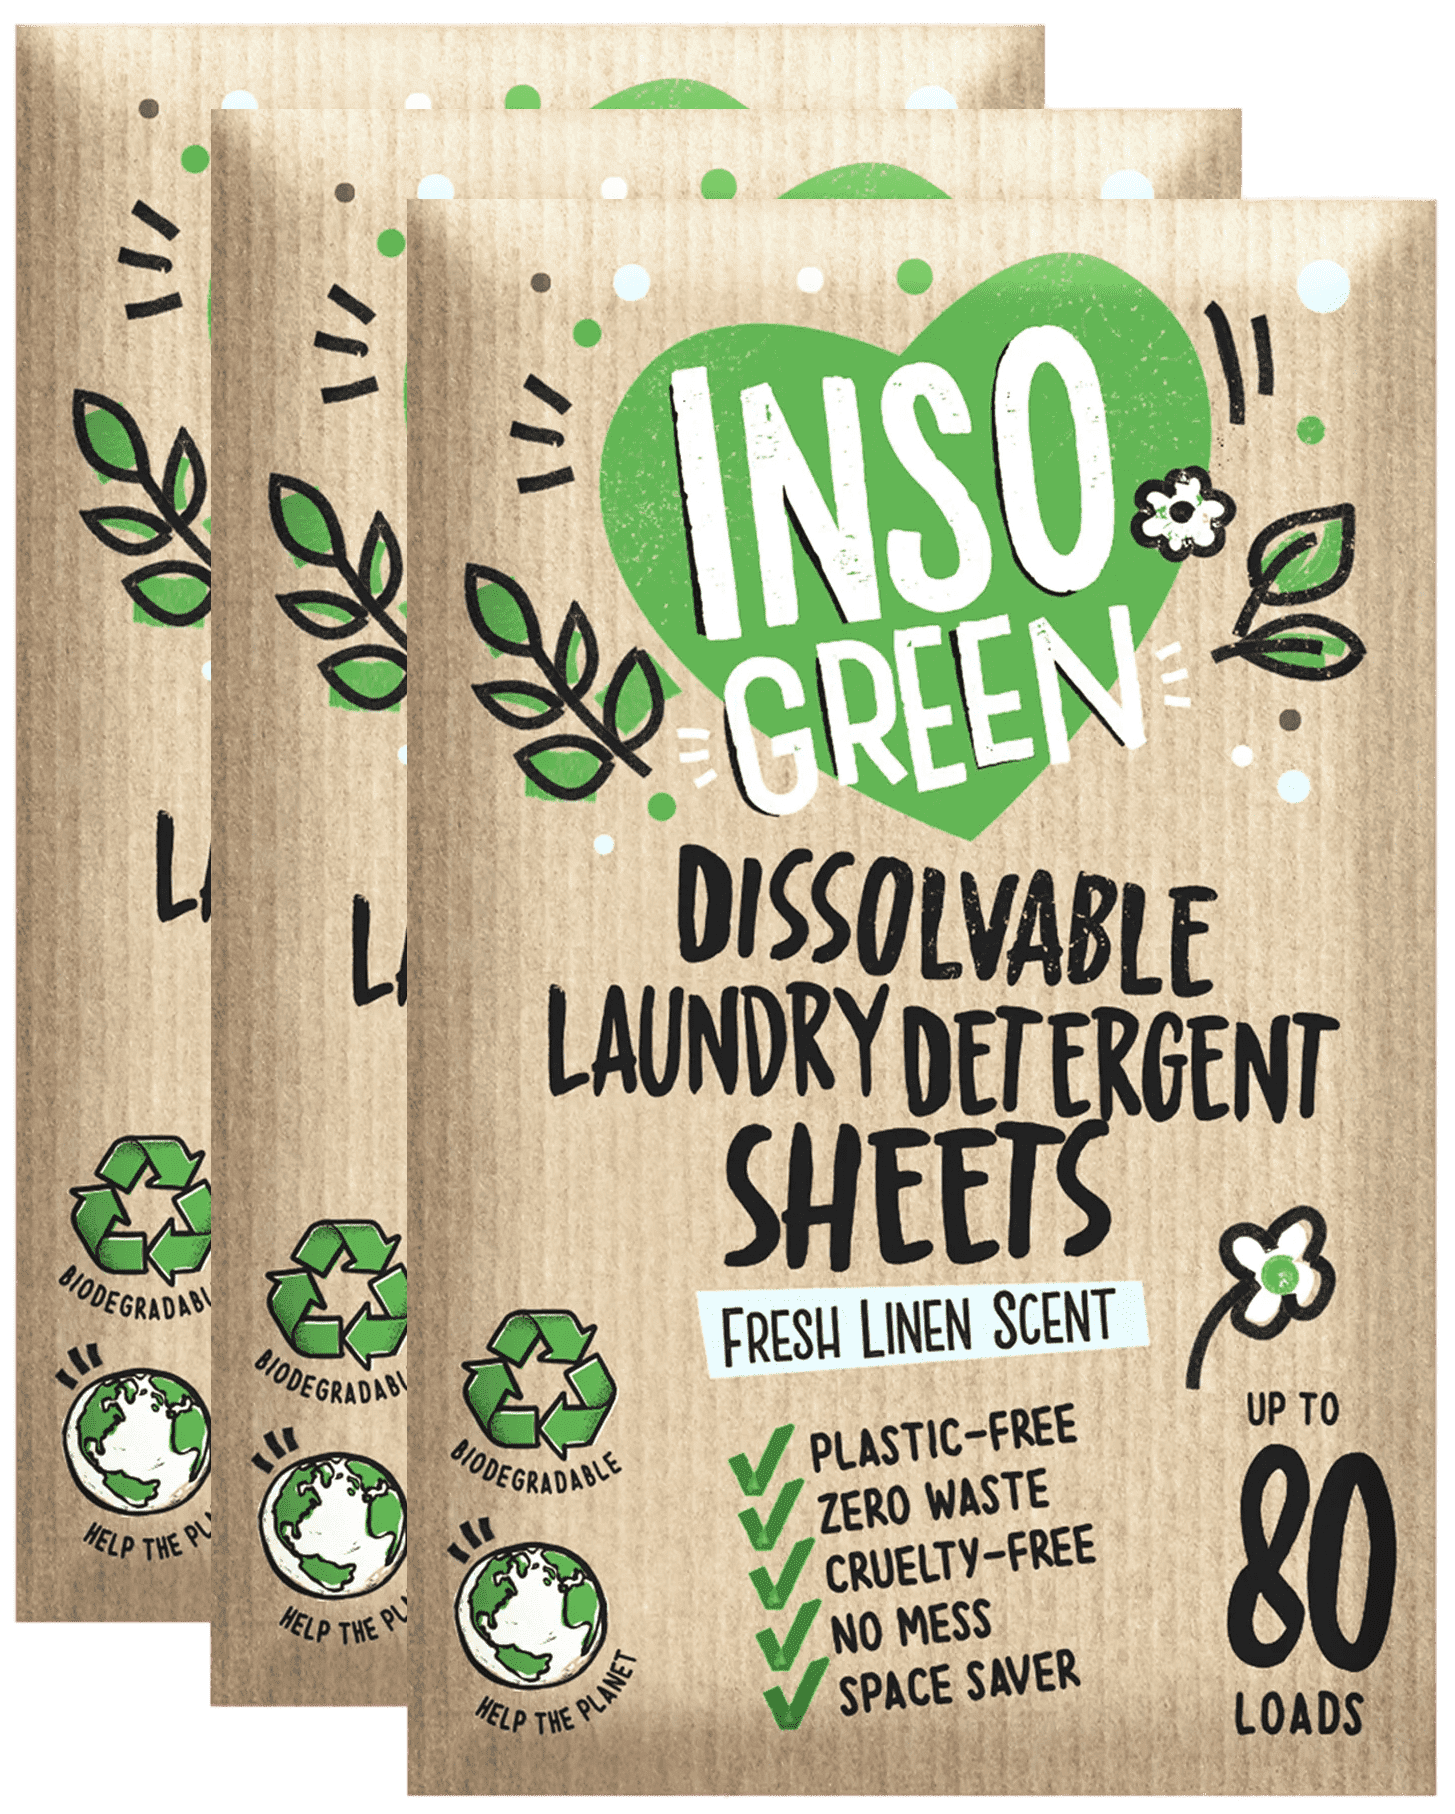 laundry-detergent-sheets-fresh-scent-value-pack-insogreen